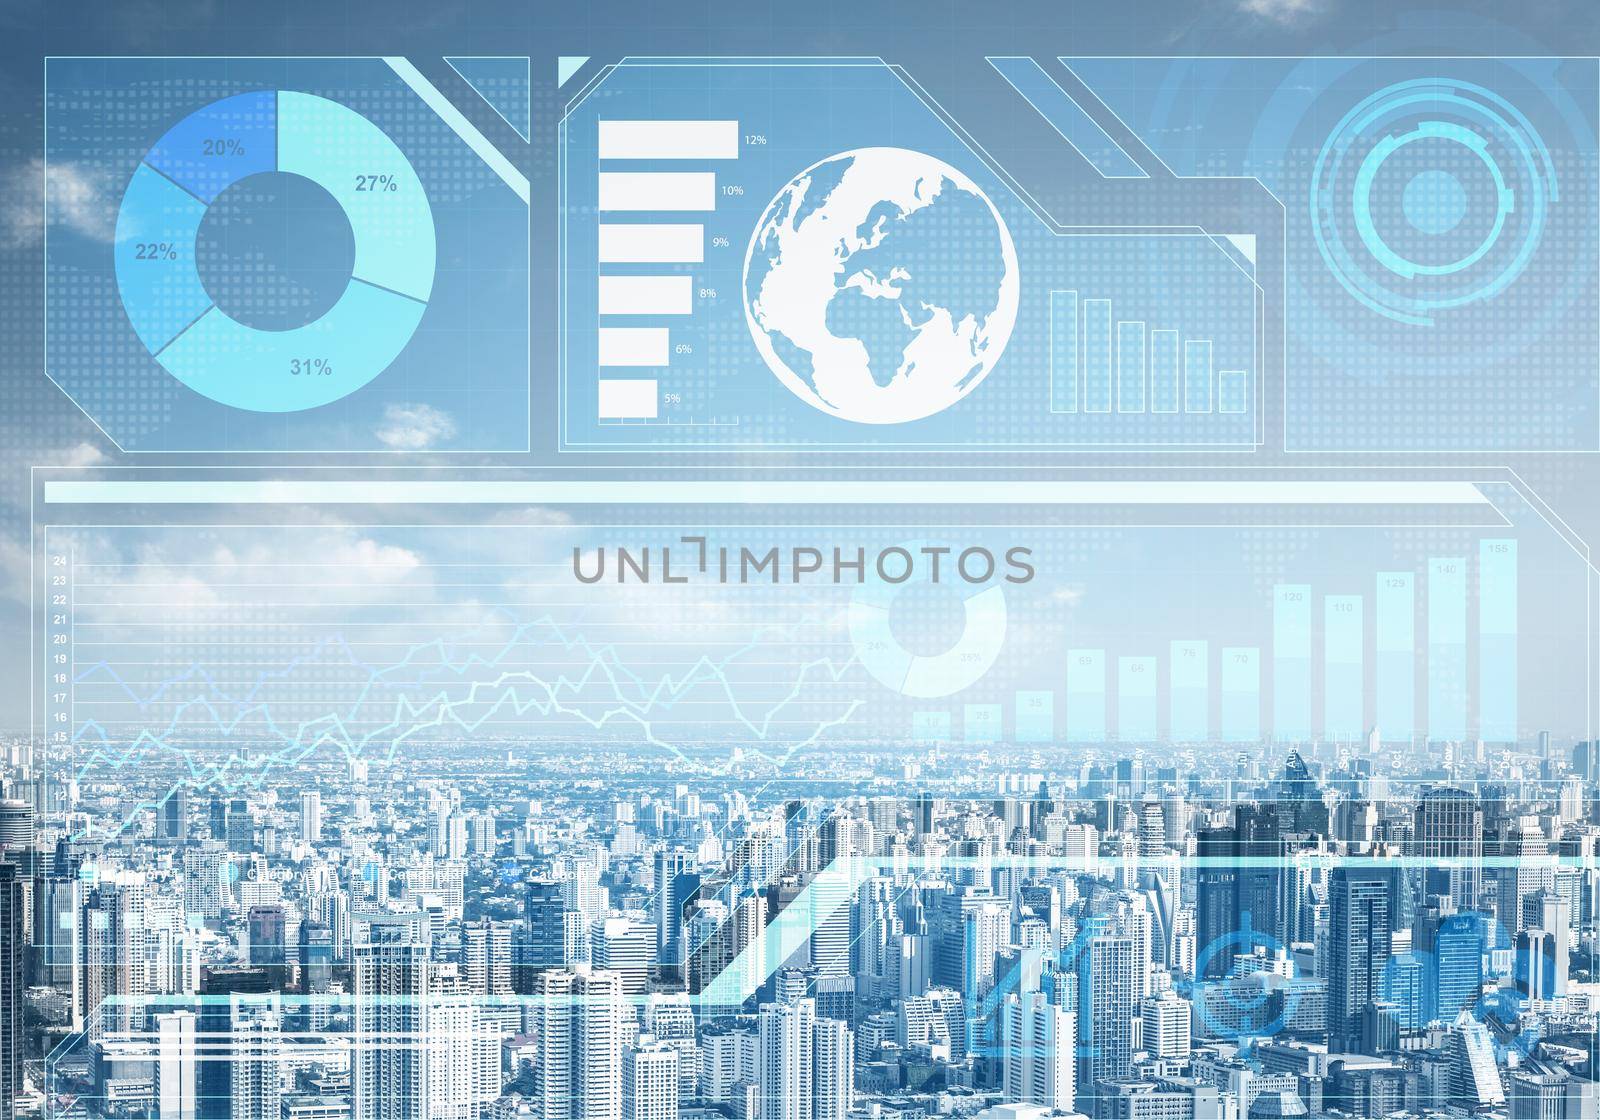 Double exposure business concept with abstract stock market data on background of modern cityscape. Virtual interface of online trading platform. Digital economic indexes, analytics and statistics.